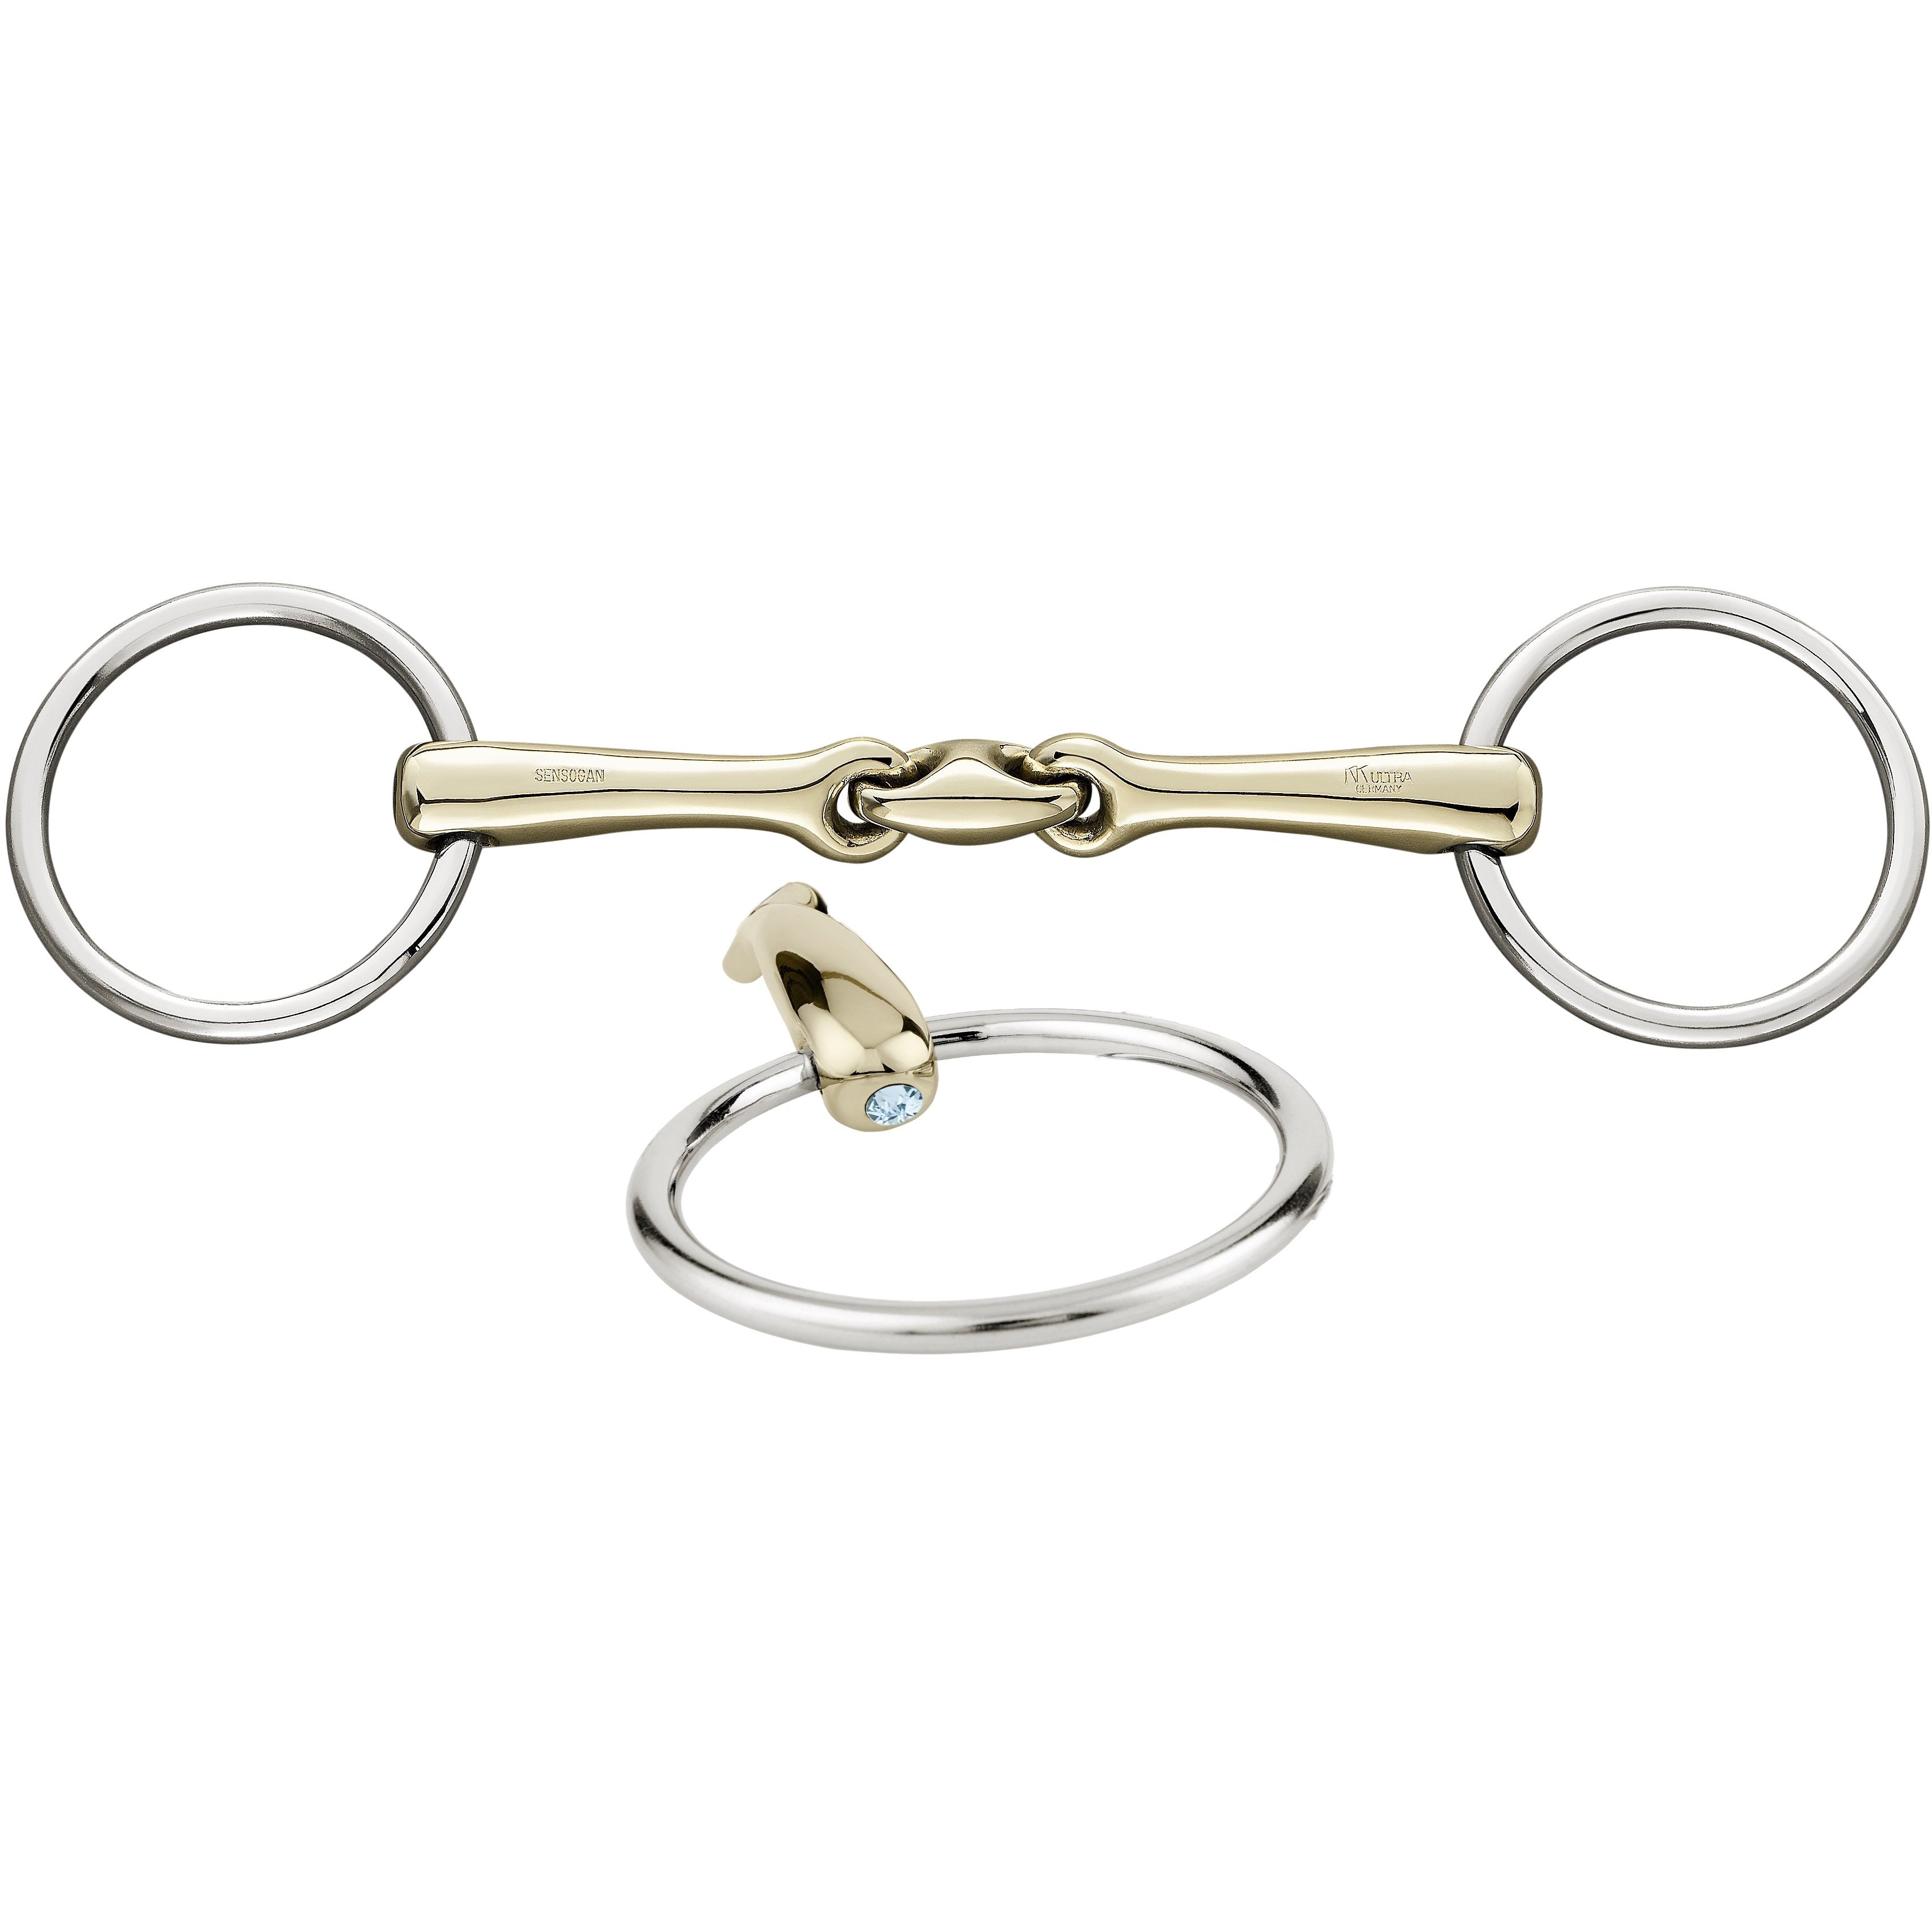 Sprenger 40426 Dynamic RS Loose ring Snaffle 16mm - Shine Bright Edition - IN STOCK